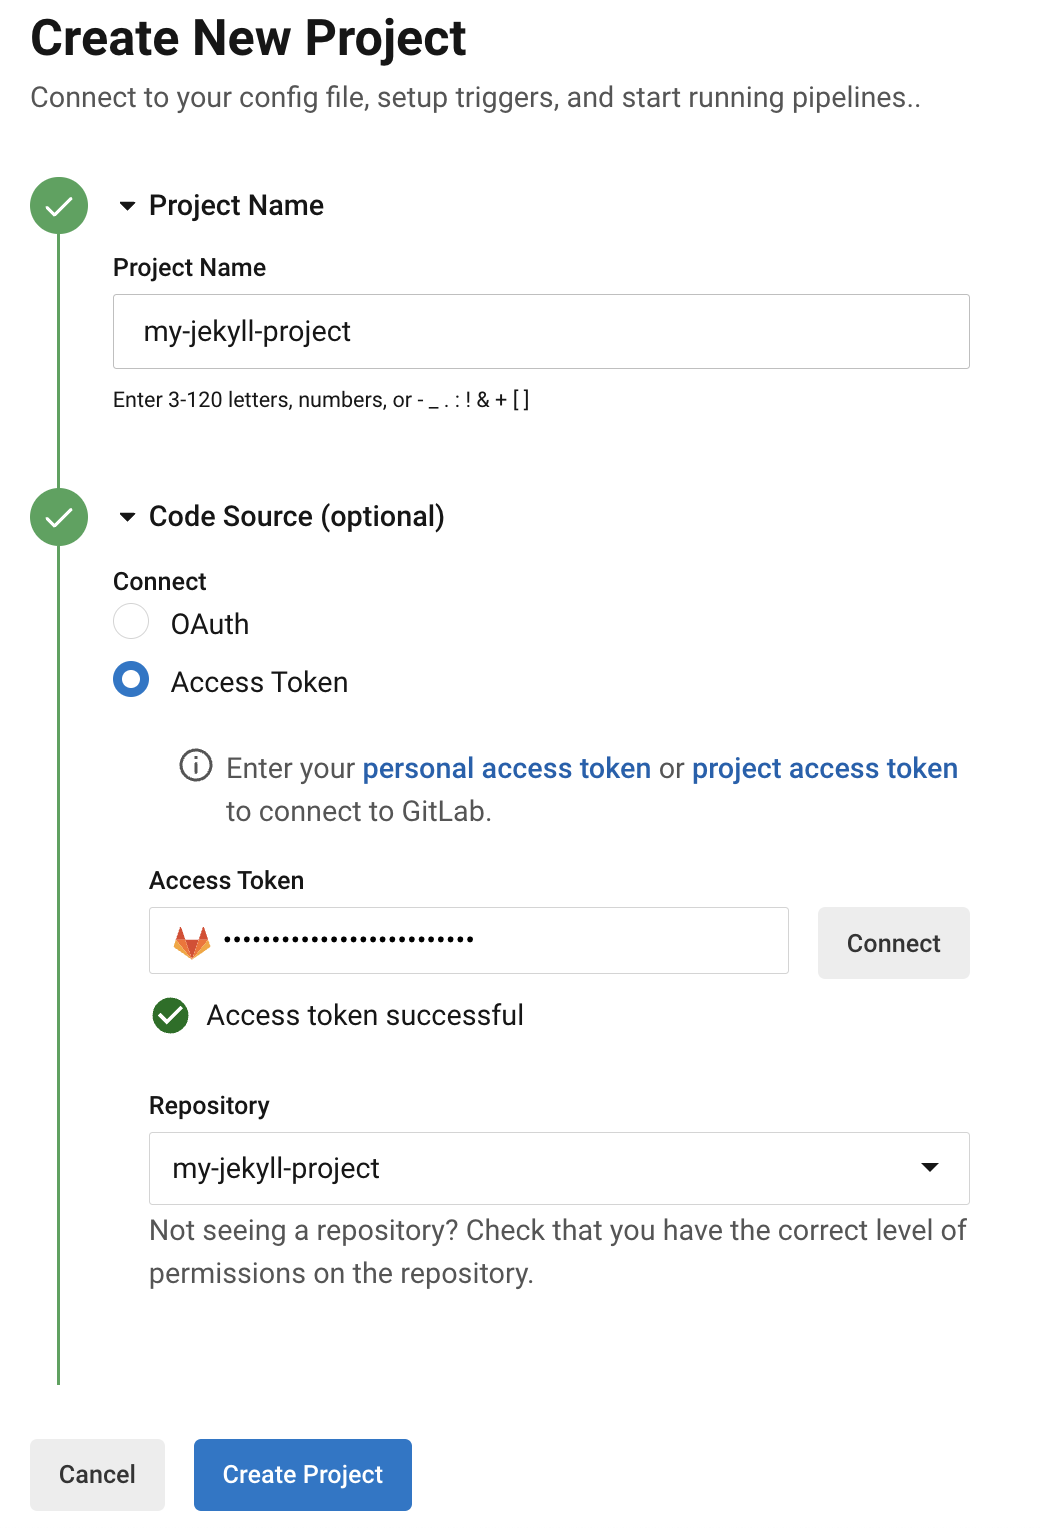 Successful GitLab connection using access token